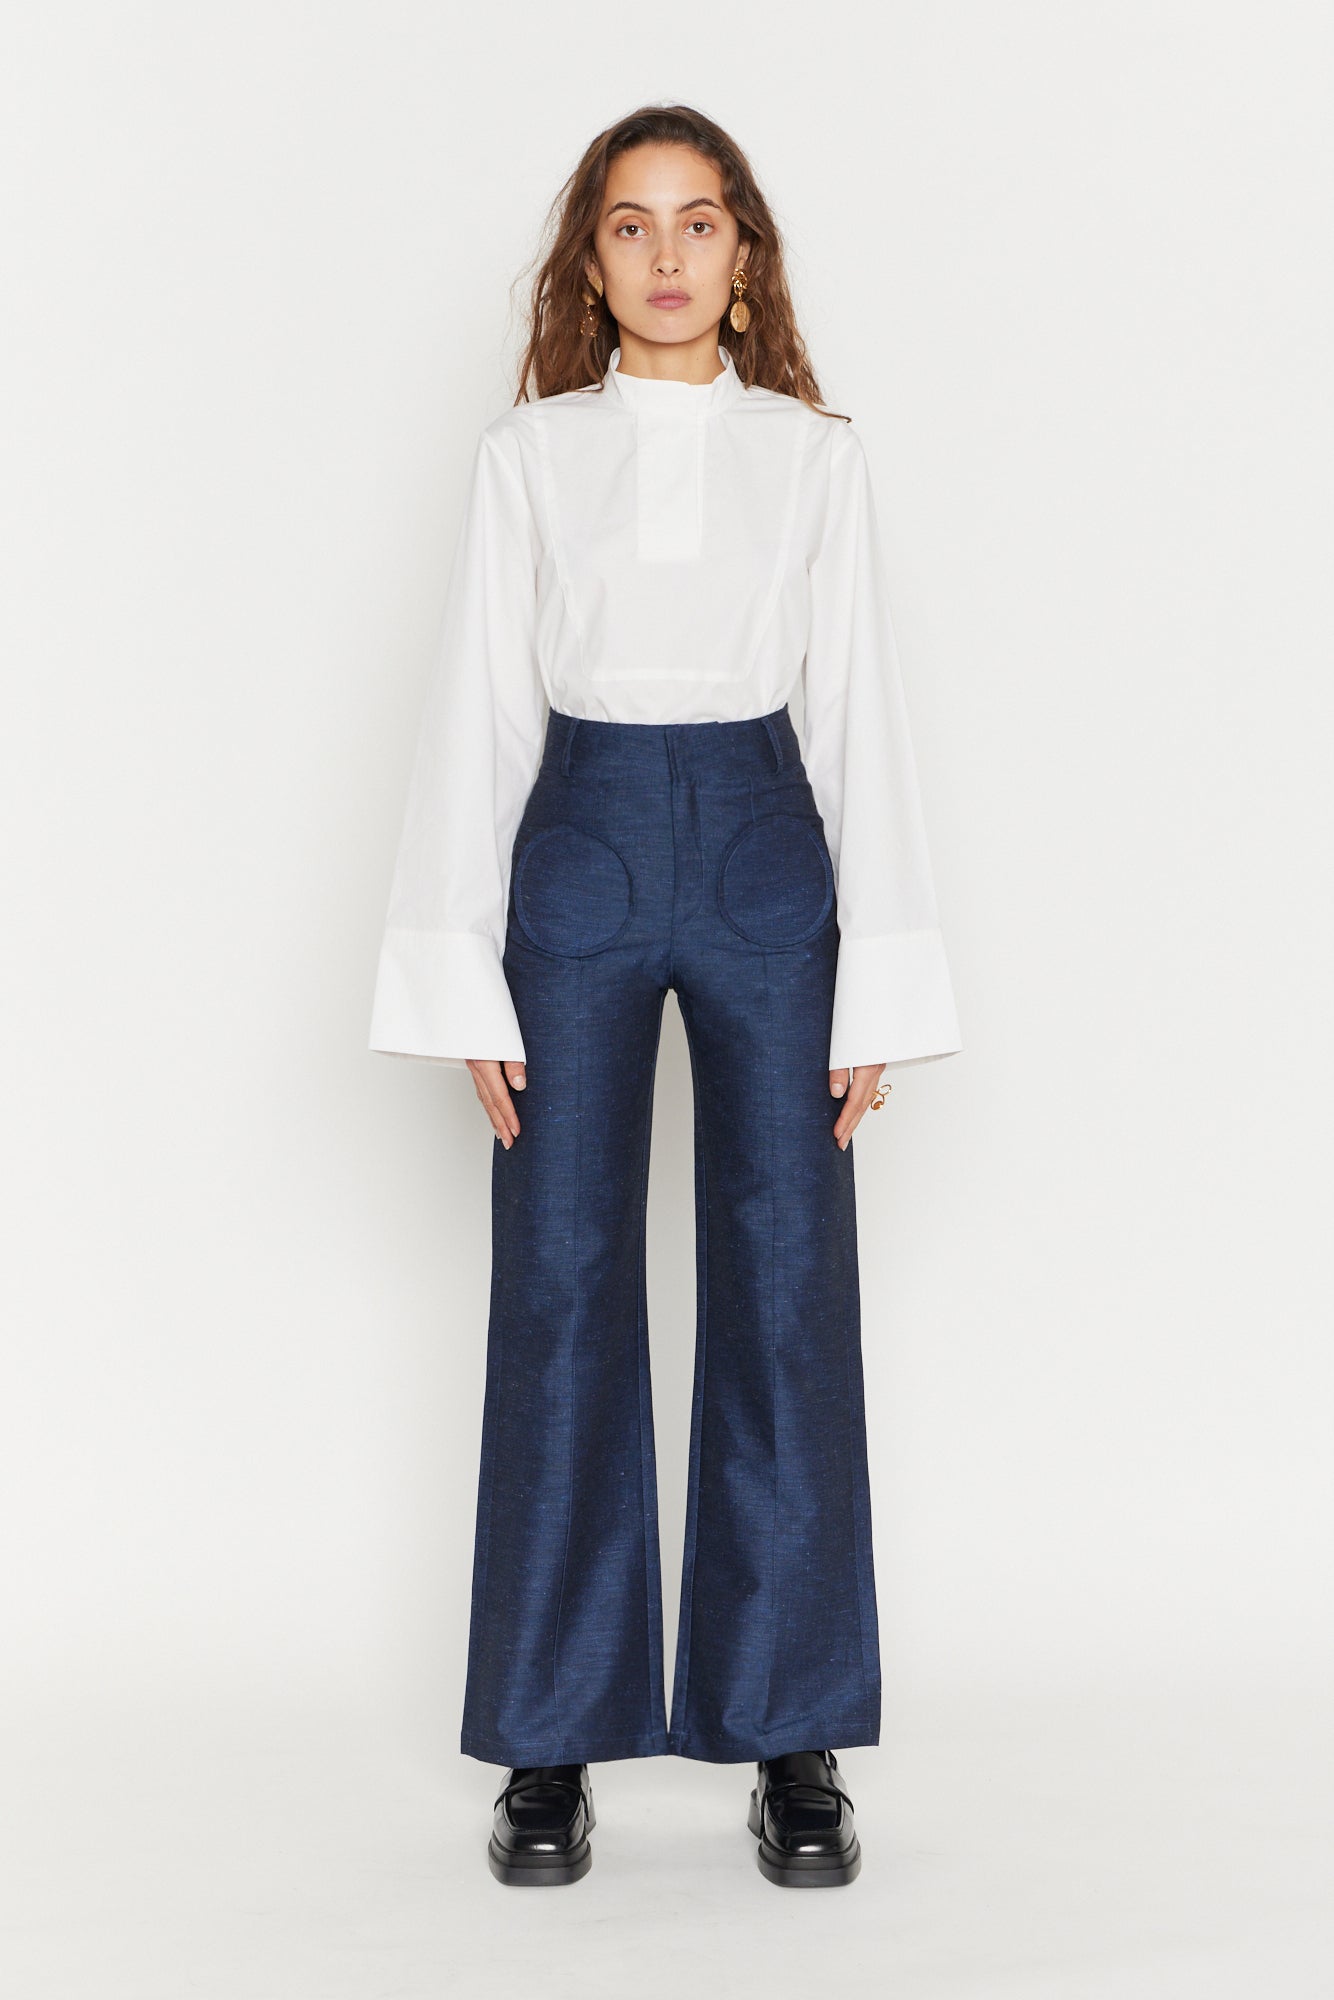 Navy Blue Flared Pants